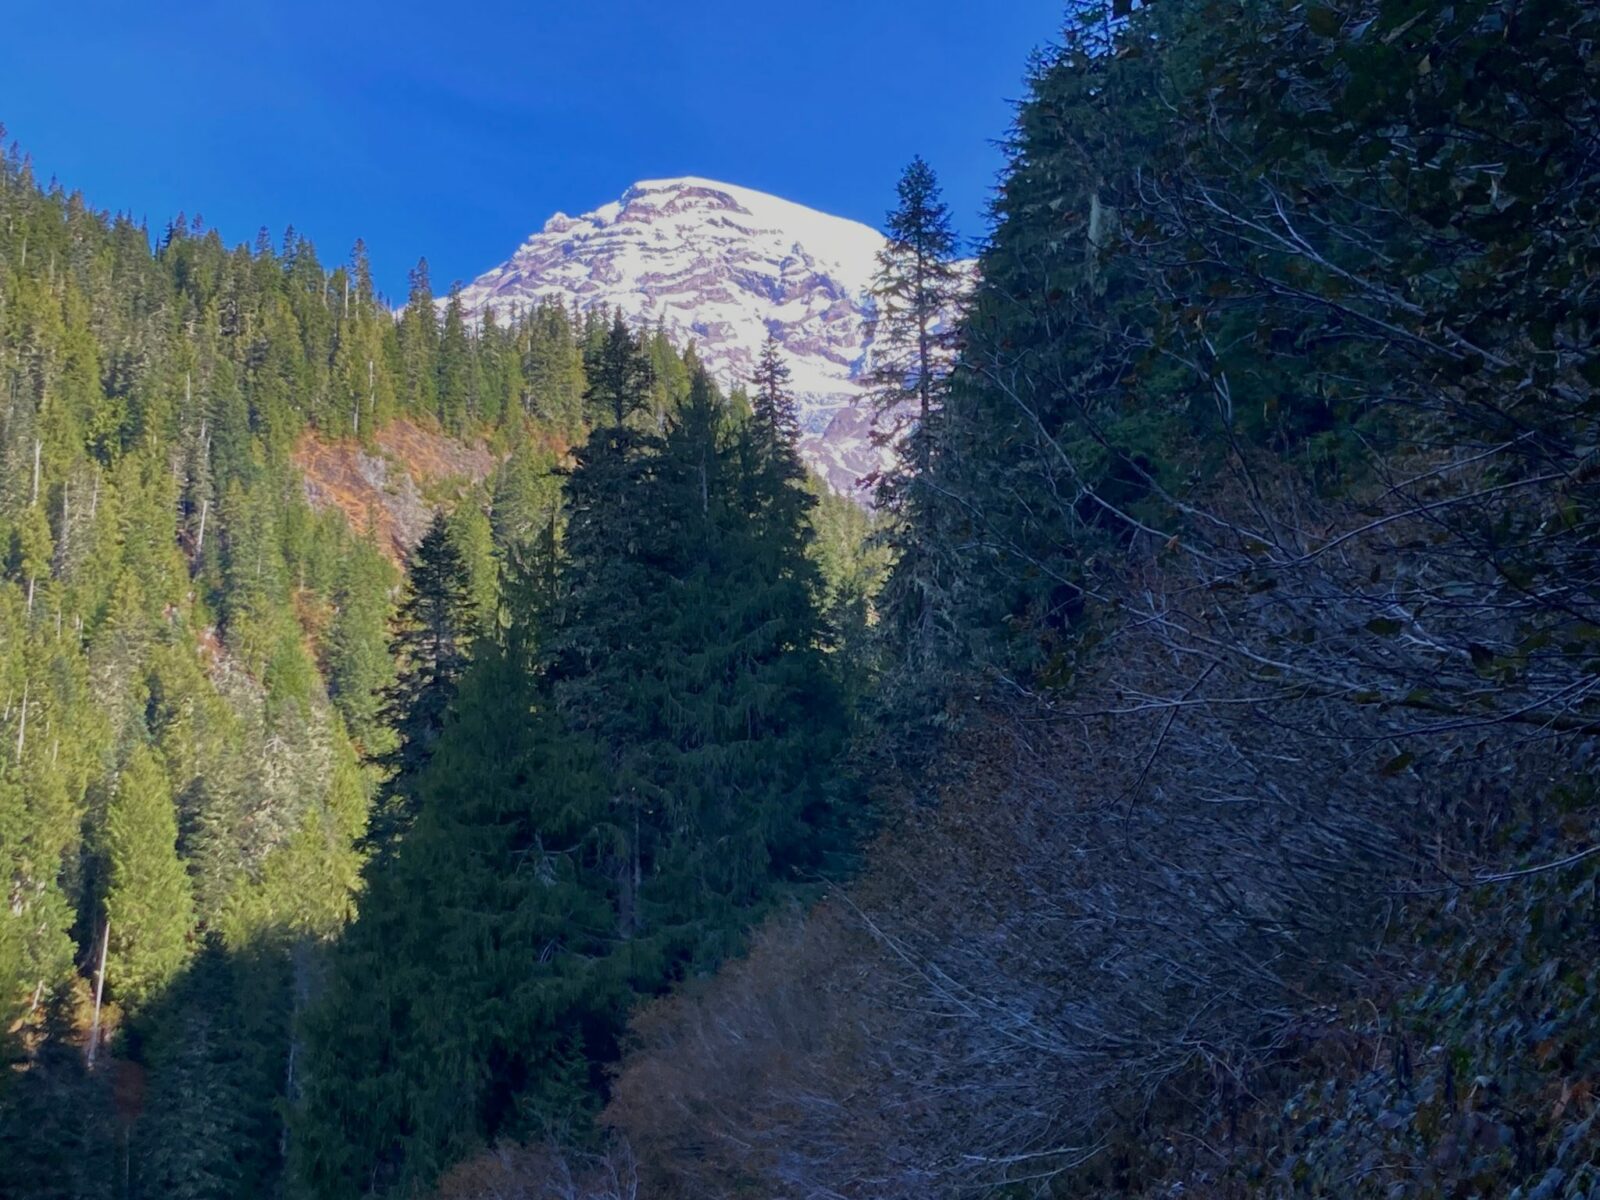 Mt Rainier is snow covered and visible in the distance in the sun. The foreground is a trail through bushes and forest in the shade